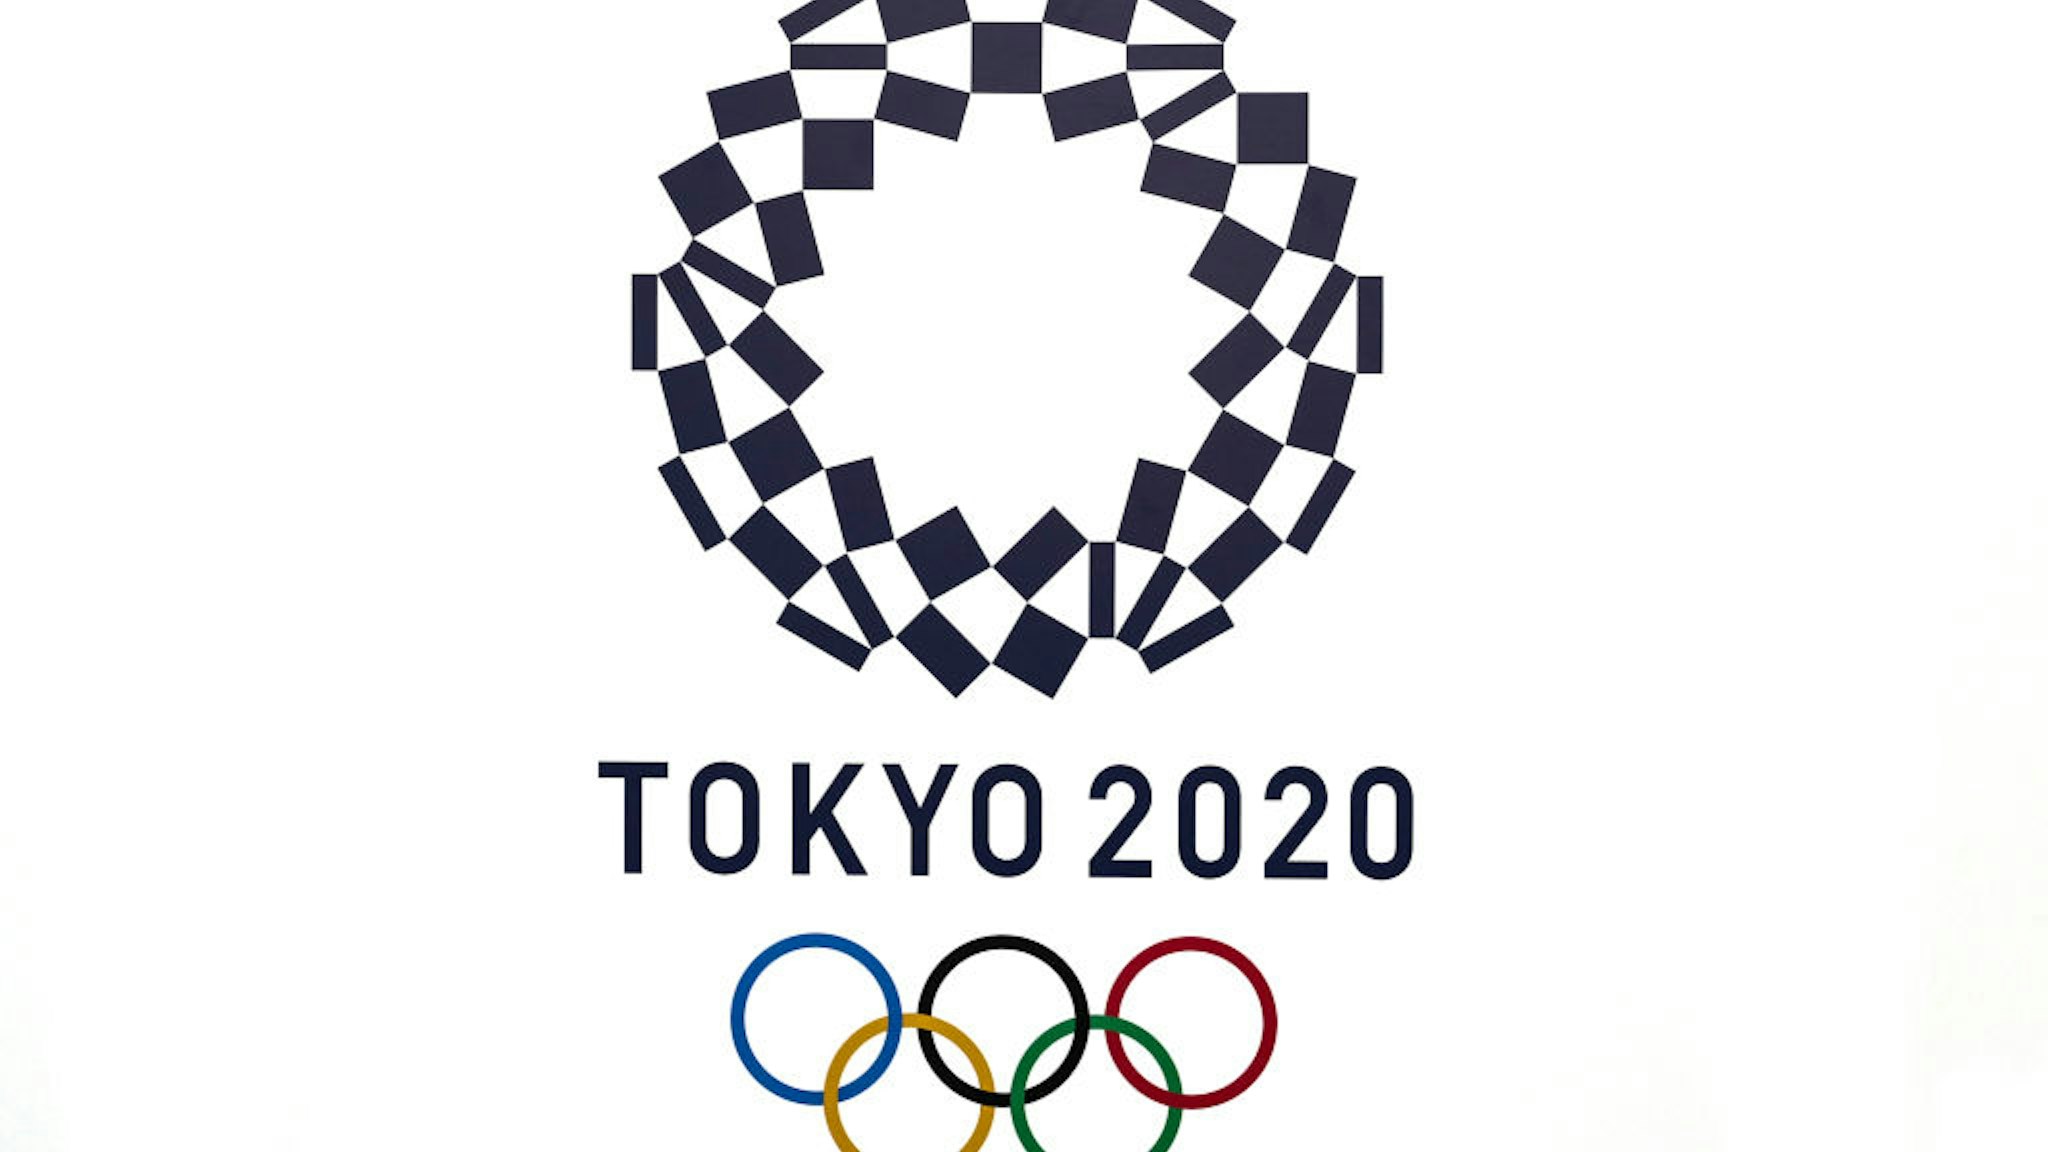 Tokyo 2020 logo during the Athletics kitting out session for the Tokyo Olympics 2020 at the Birmingham NEC, UK.